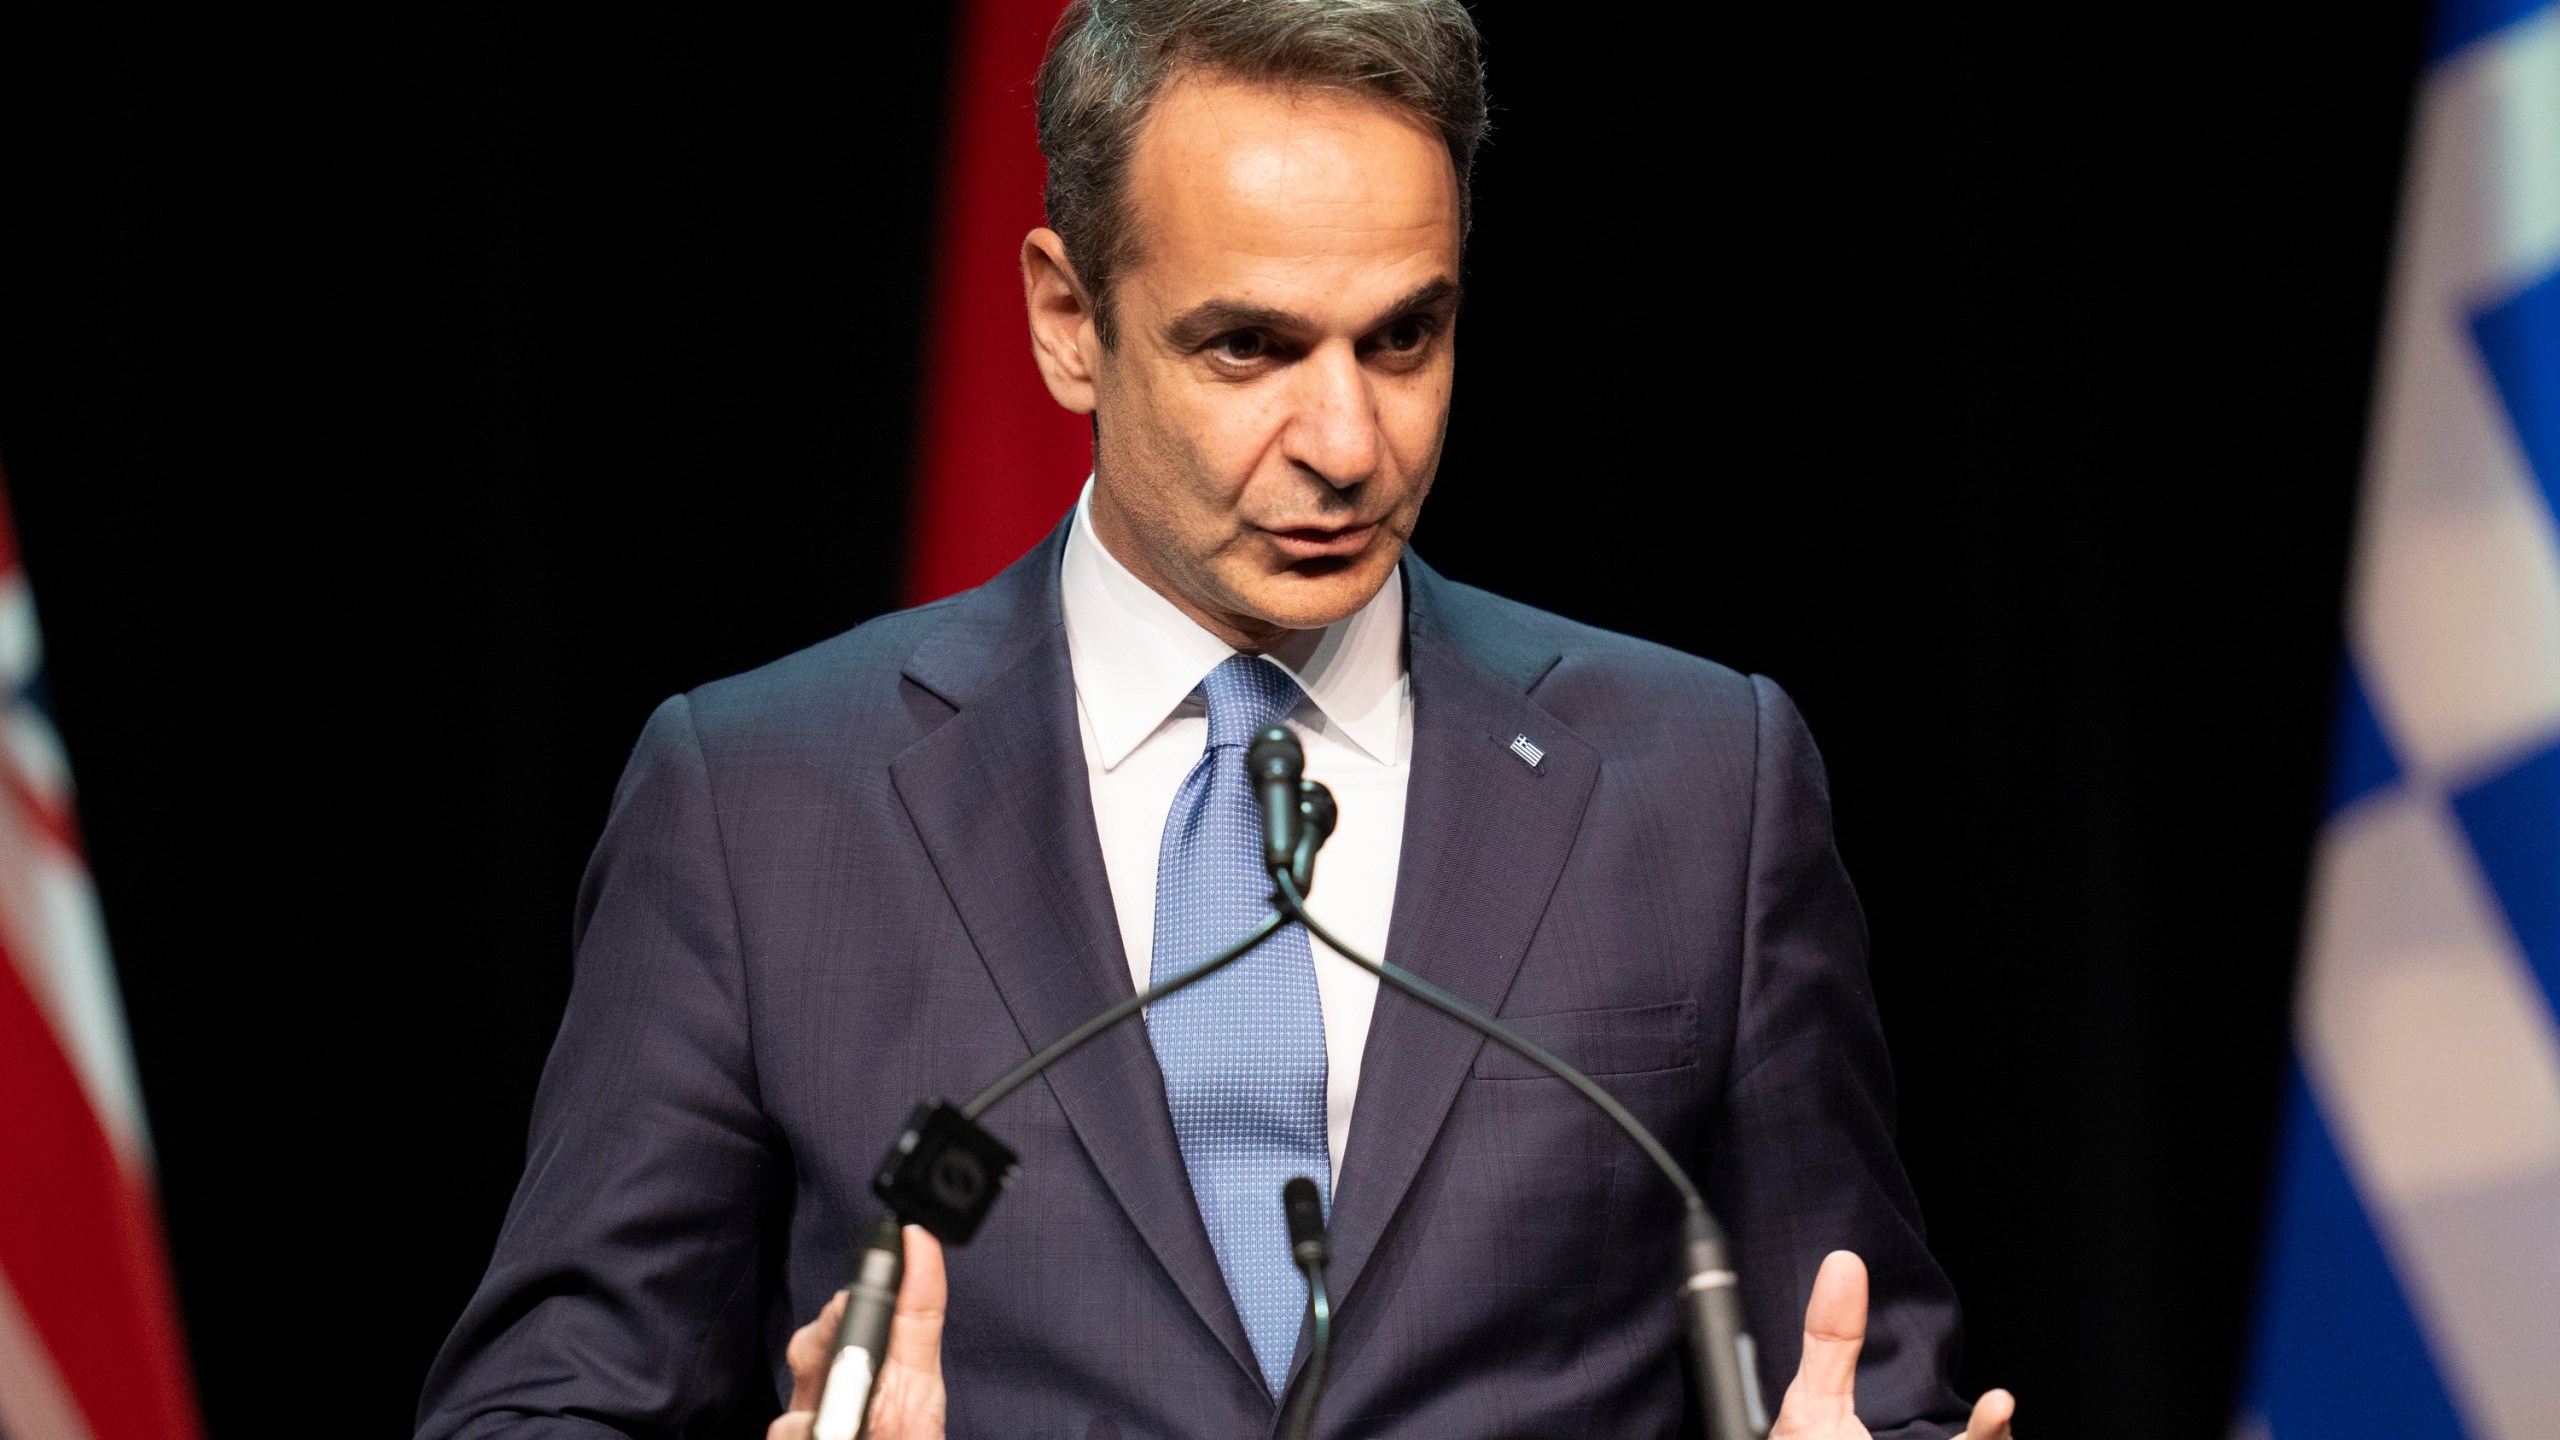 Prime Minister of Greece Kyriakos Mitsotakis speaks at an event hosted by the Hellenic community in Toronto on Monday, March 25, 2024. (Arlyn McAdorey/The Canadian Press via AP)